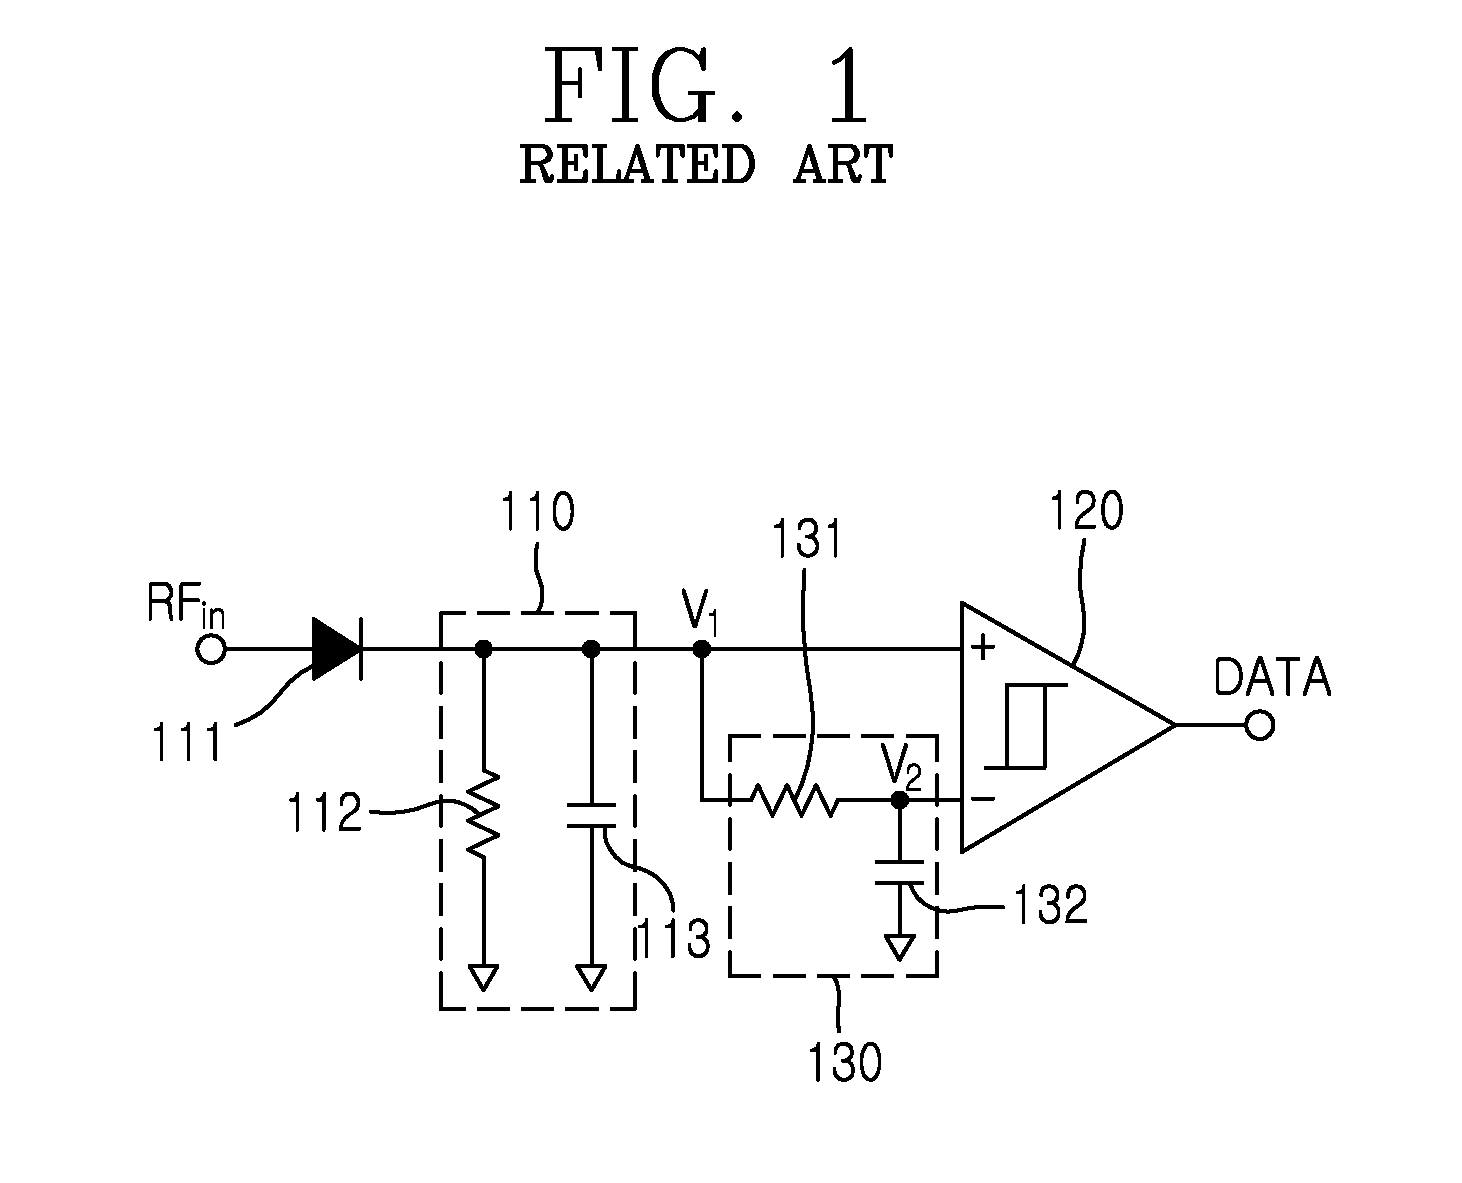 Demodulation apparatus and method for operating the same